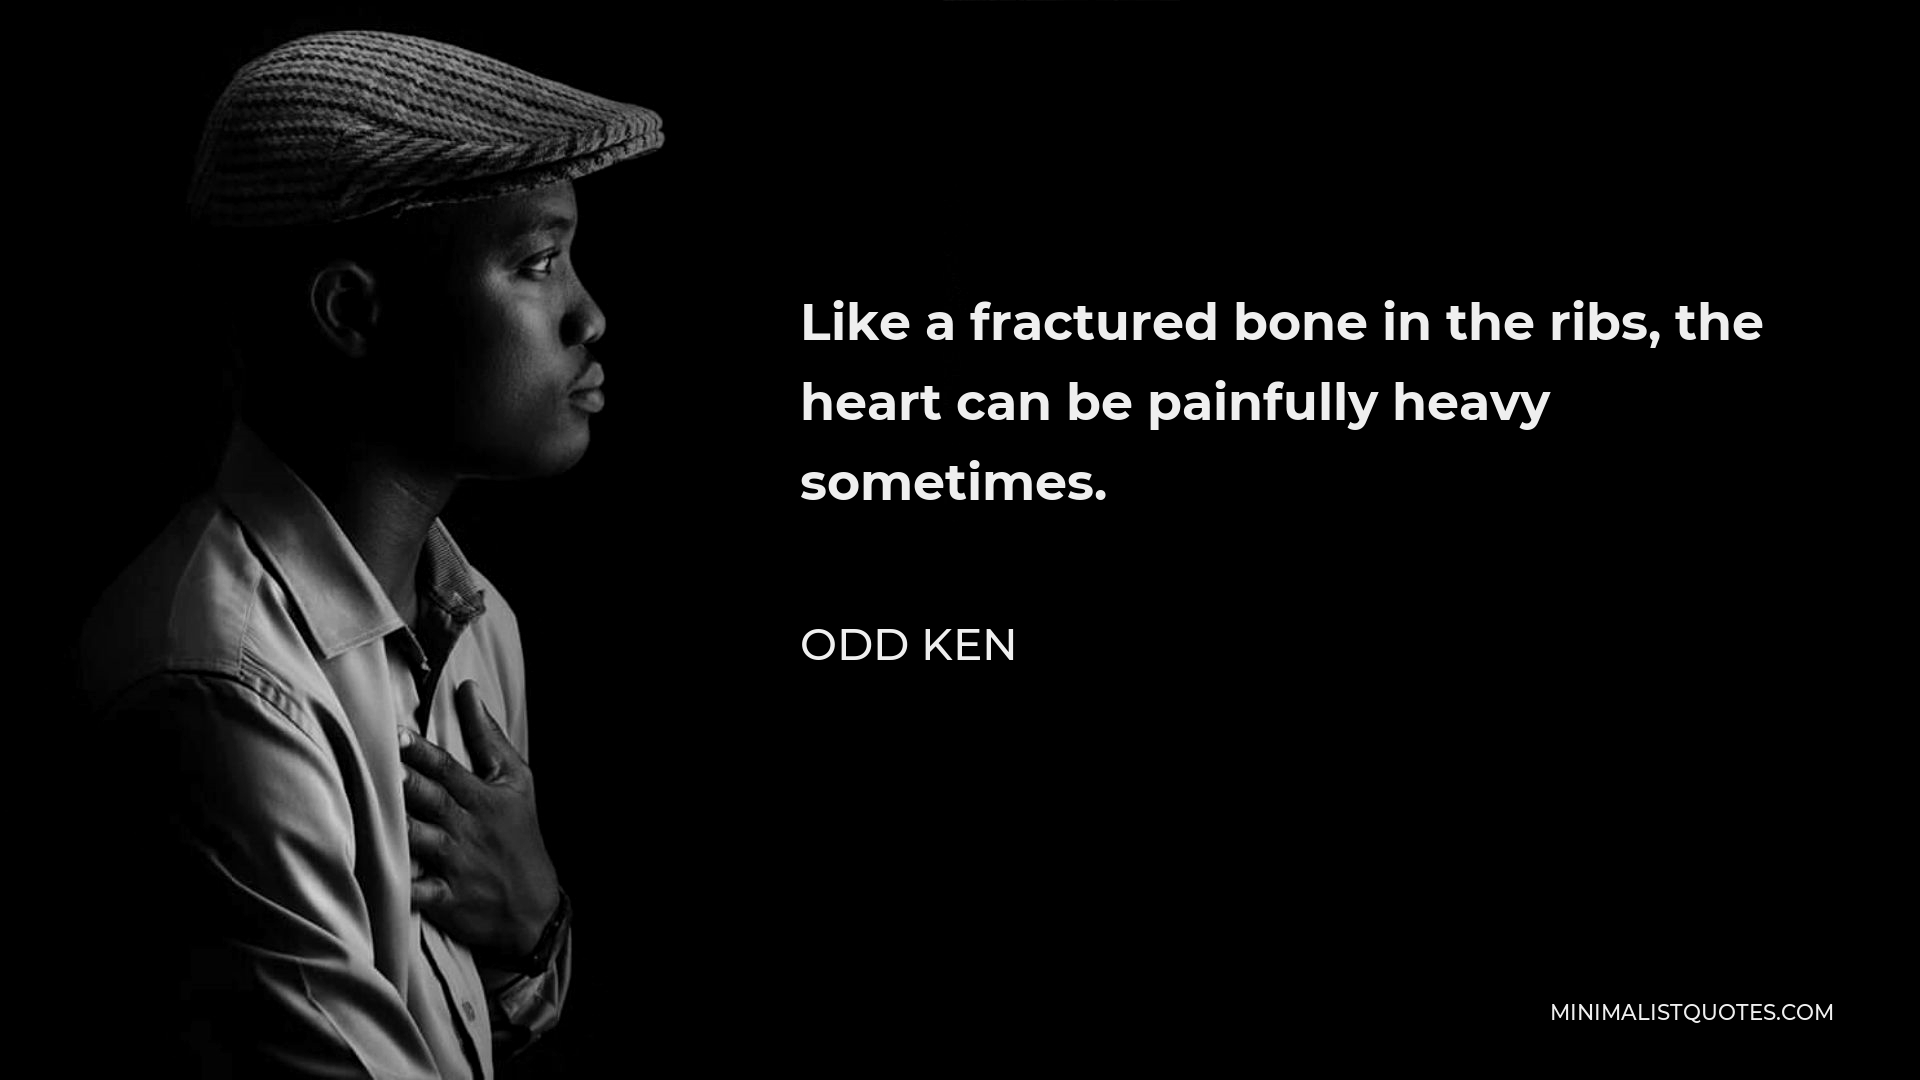 Odd Ken Quote - Like a fractured bone in the ribs, the heart can be painfully heavy sometimes.